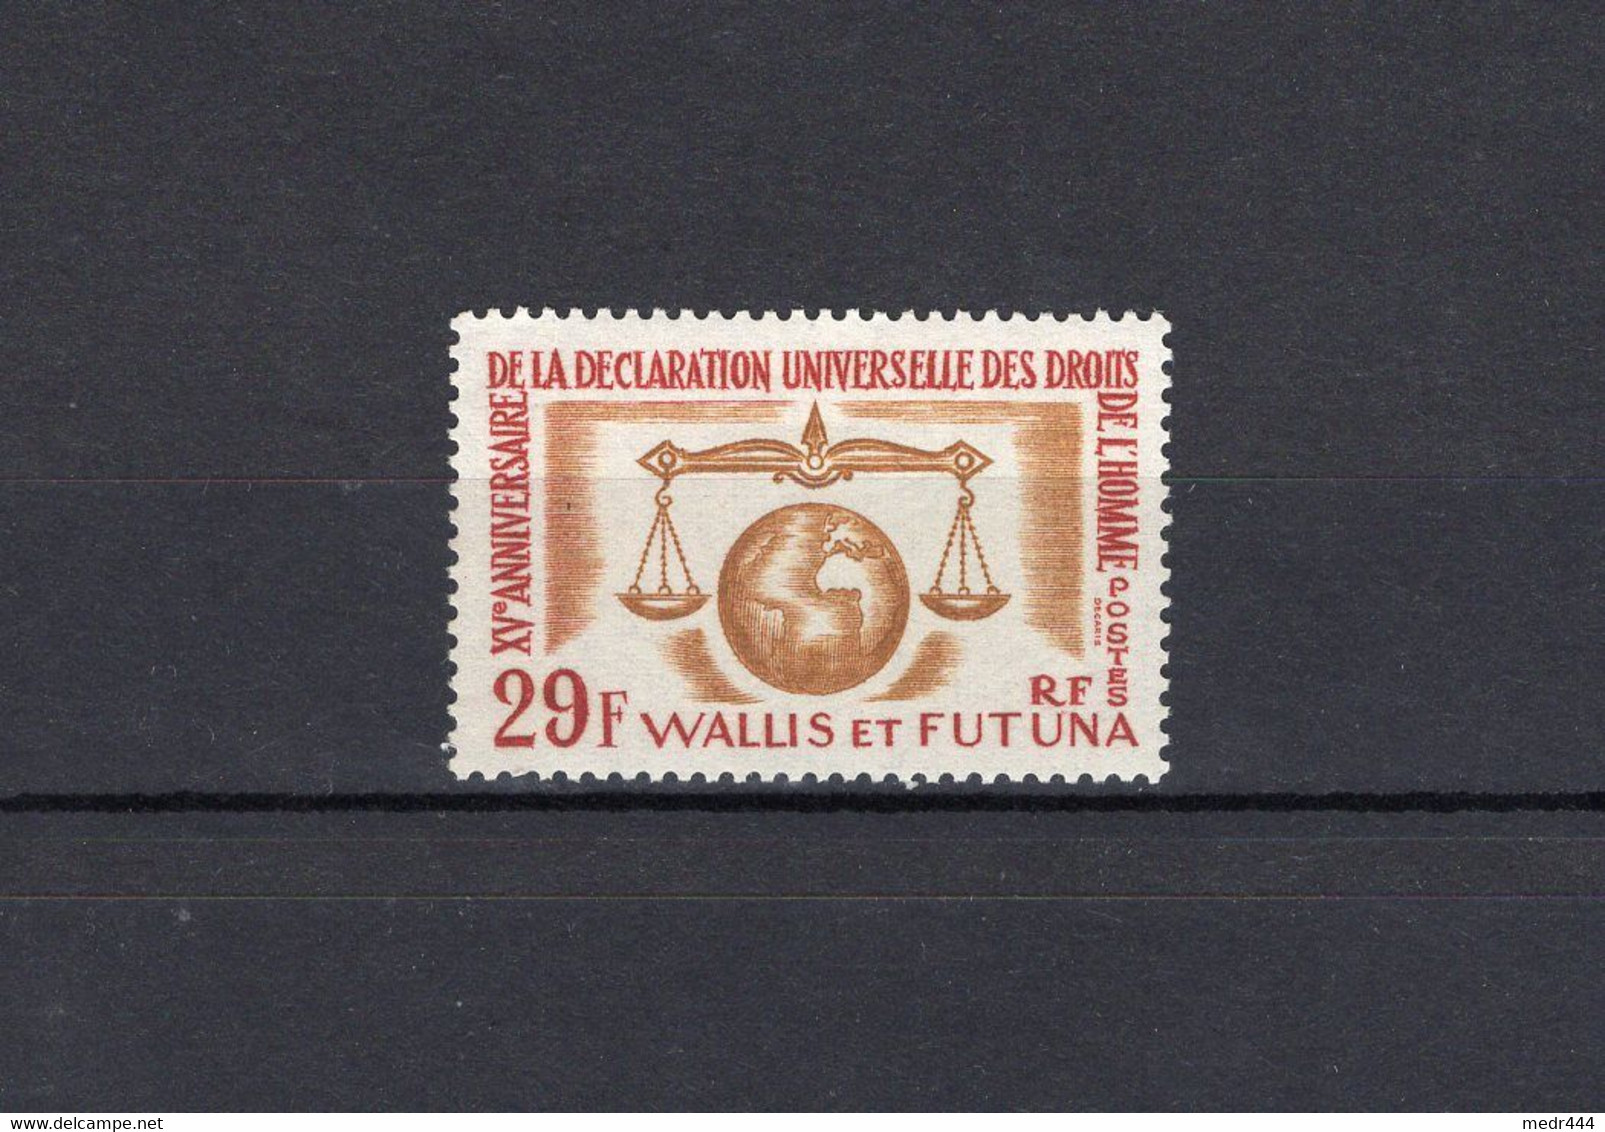 Wallis And Futuna 1963 - The 15th Anniversary Of Human Rights Declaration - Stamp 1v - MNH** - Excellent Quality - Brieven En Documenten